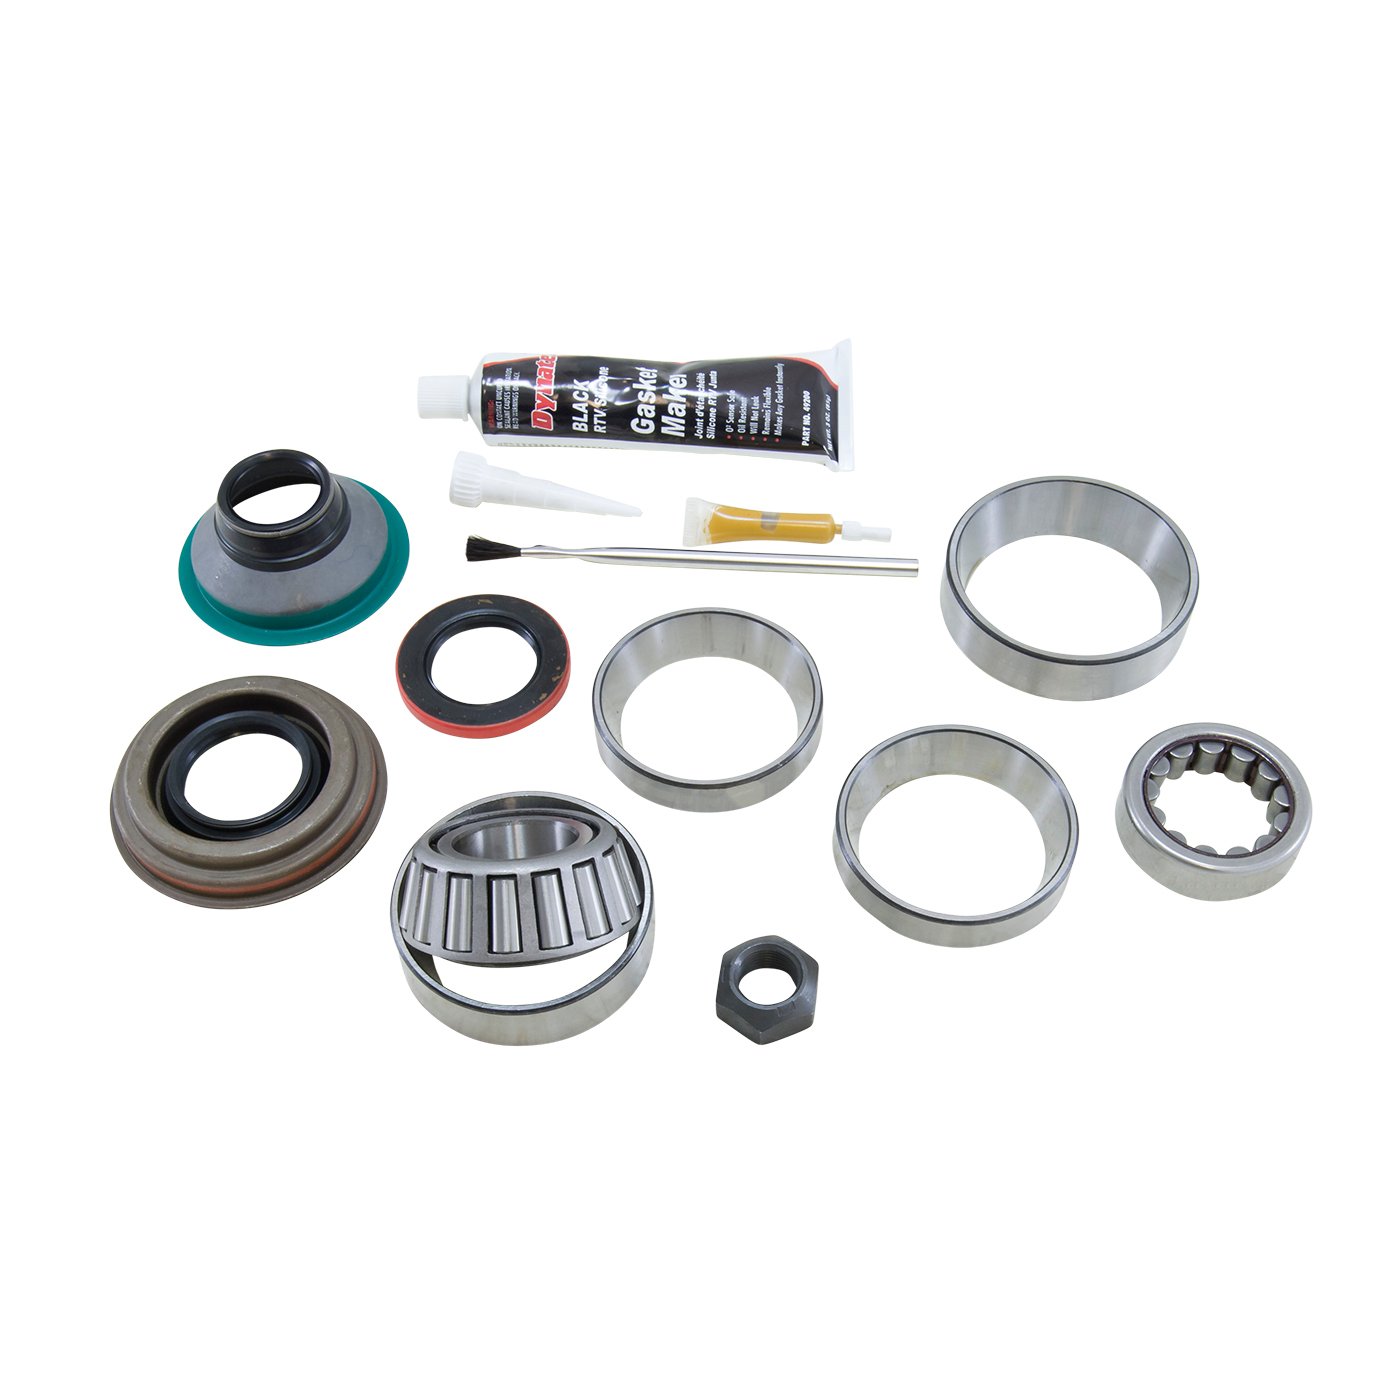 Bearing Install Kit For '92 And Newer Dana